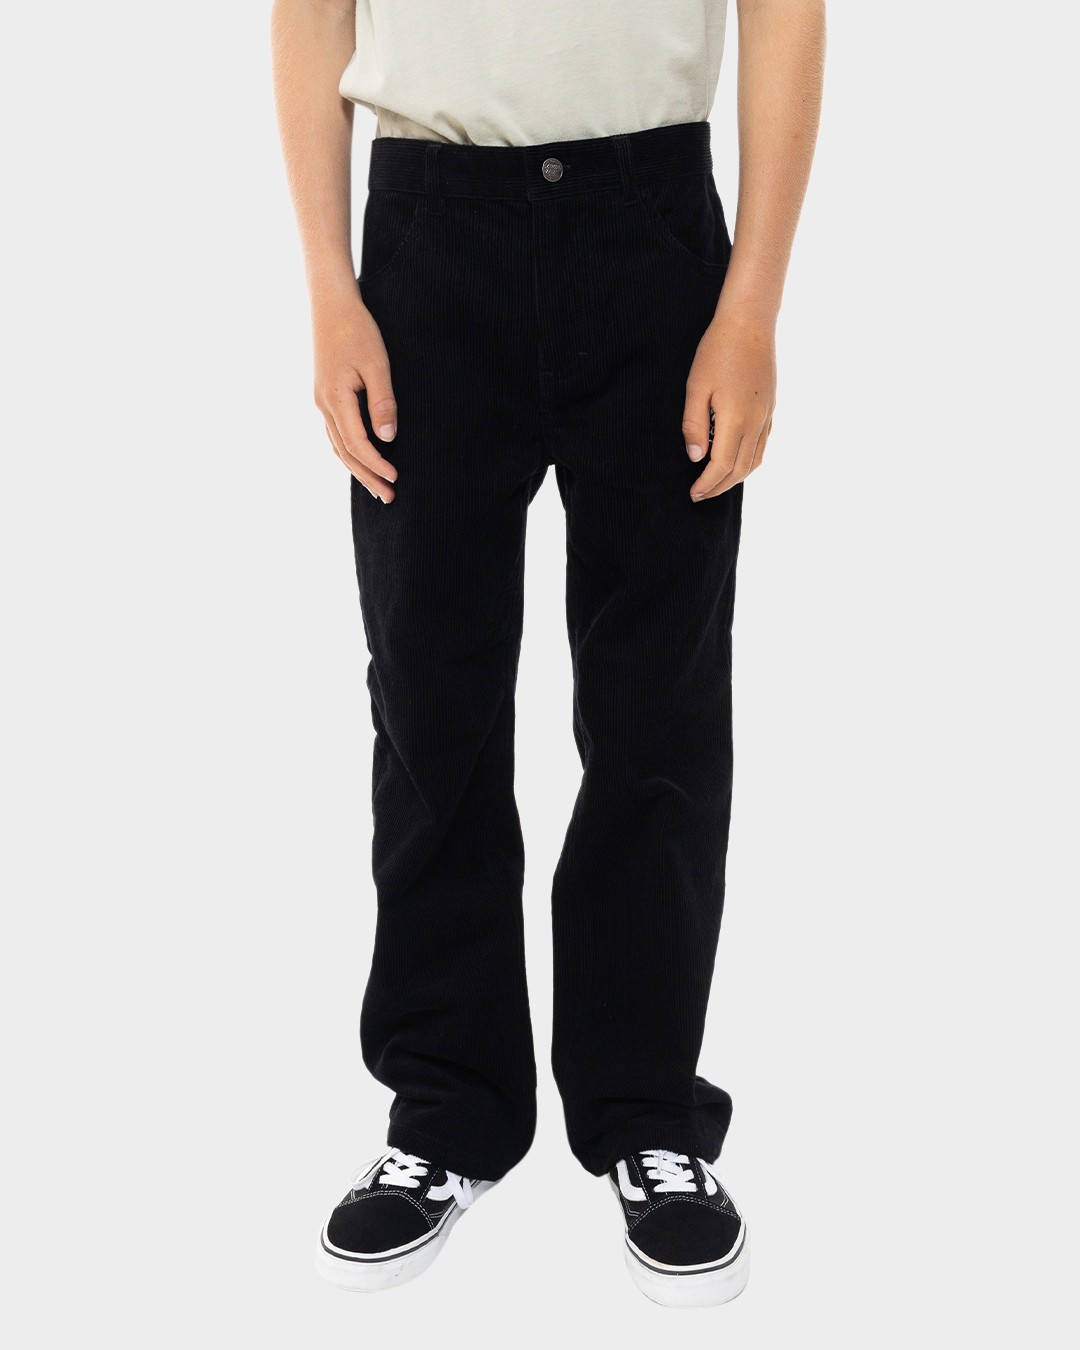 Route One Super Baggy Big Wale Cords  Black